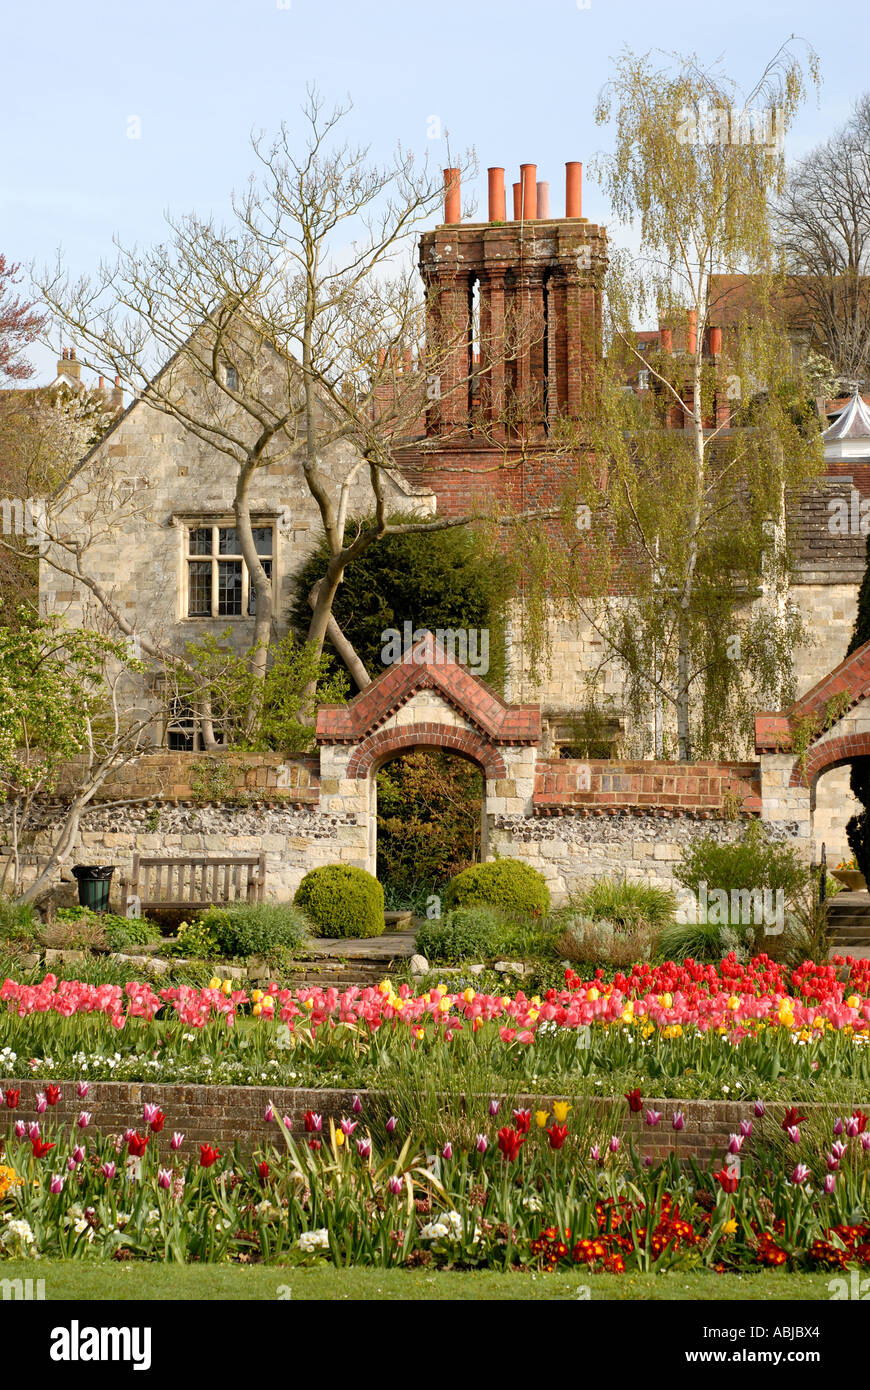 Southover Grange and  Gardens Lewes. View of garden  with brightly coloured spring flowers. Tulips. Stock Photo